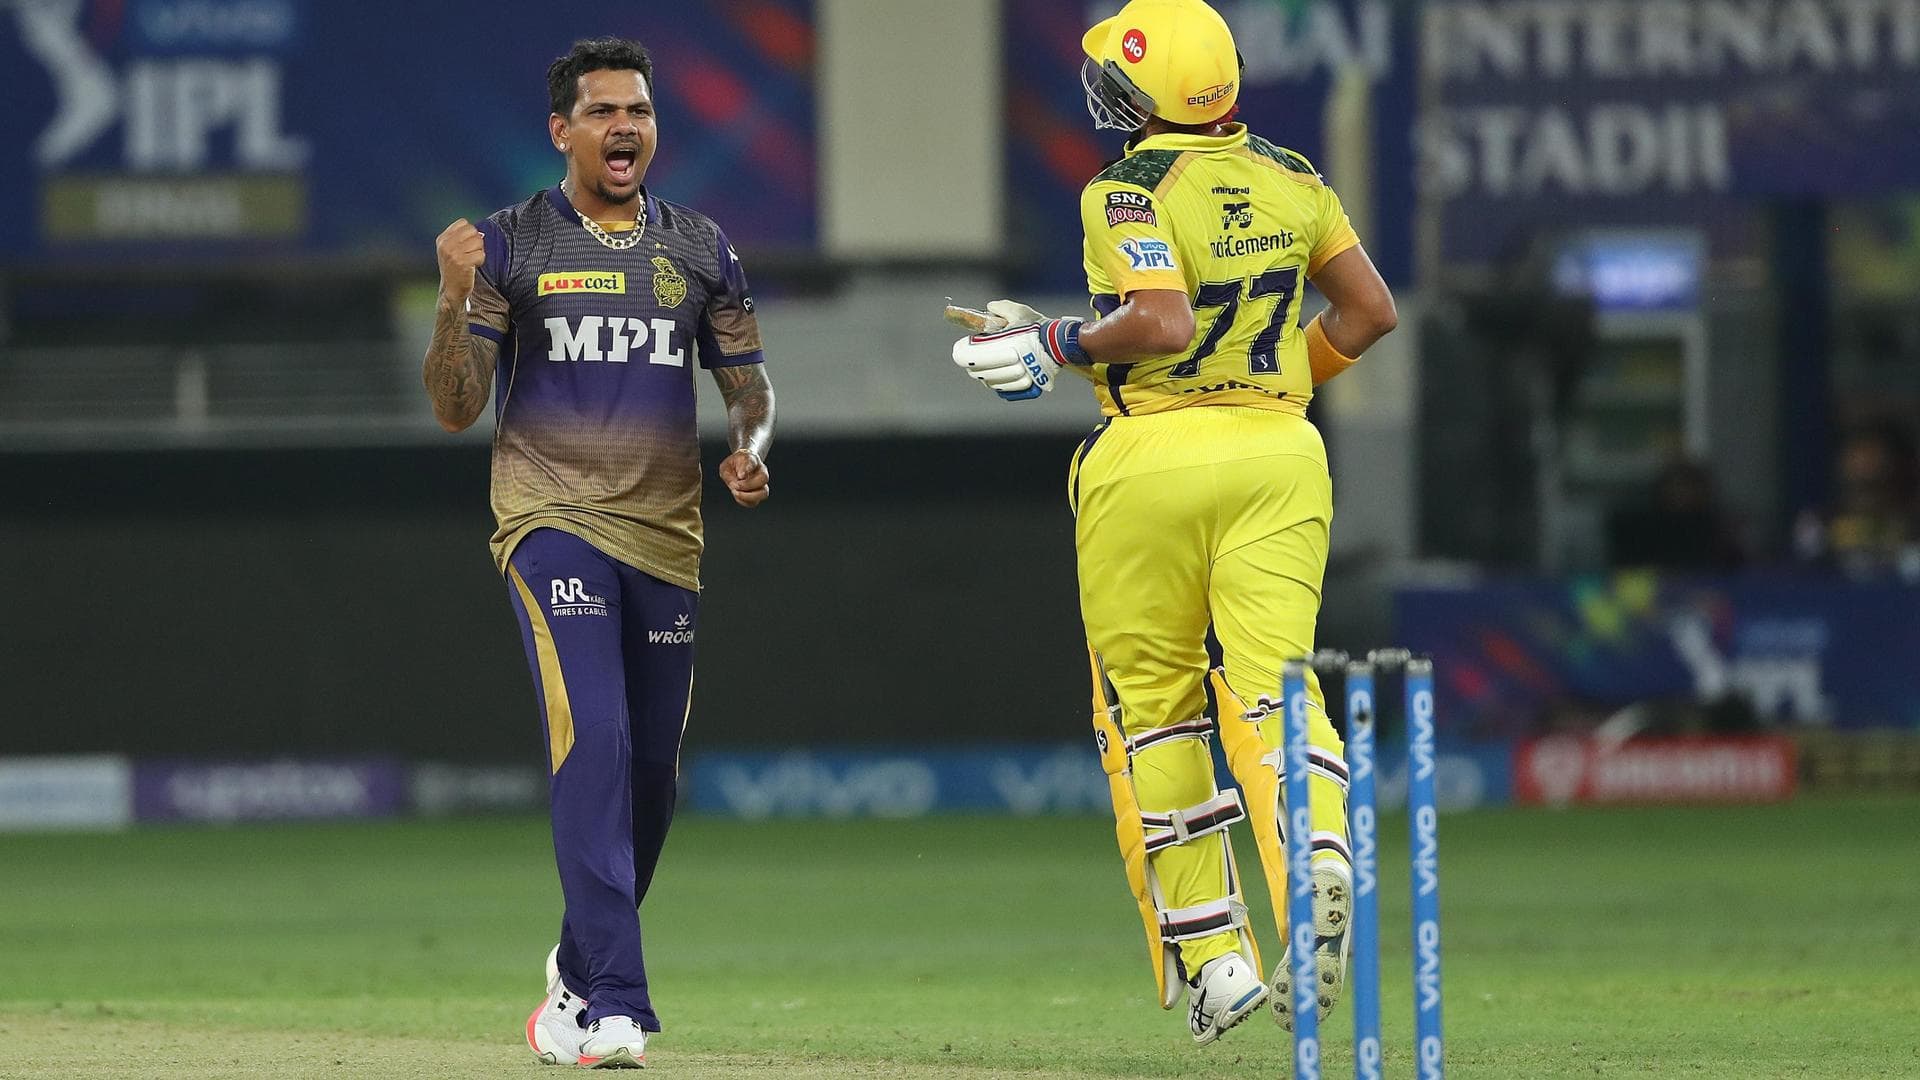 Sunil Narine completes 500 T20 wickets: Decoding his stats